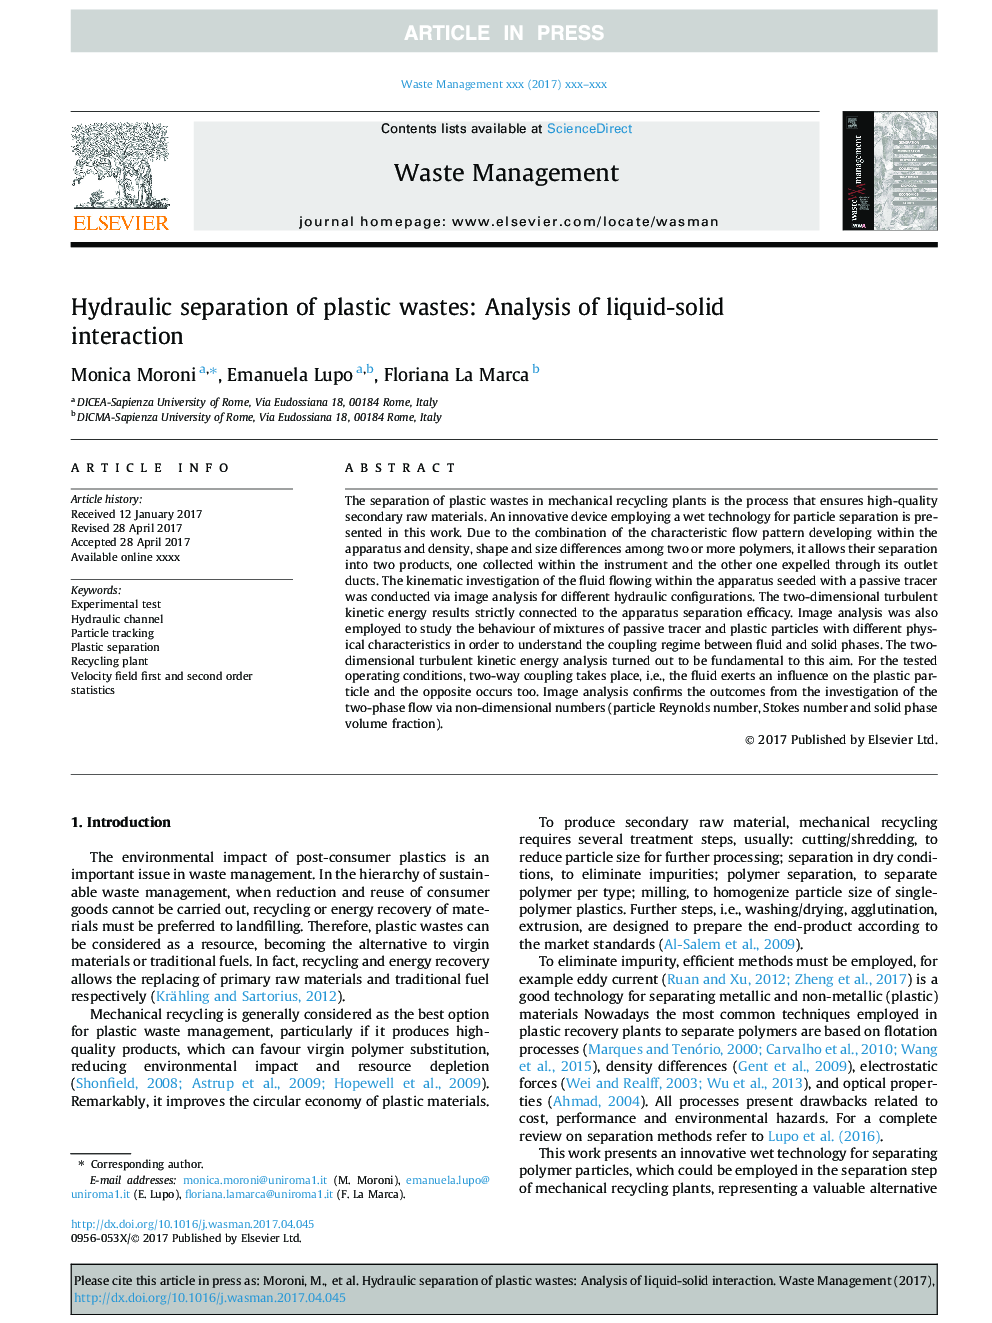 Hydraulic separation of plastic wastes: Analysis of liquid-solid interaction